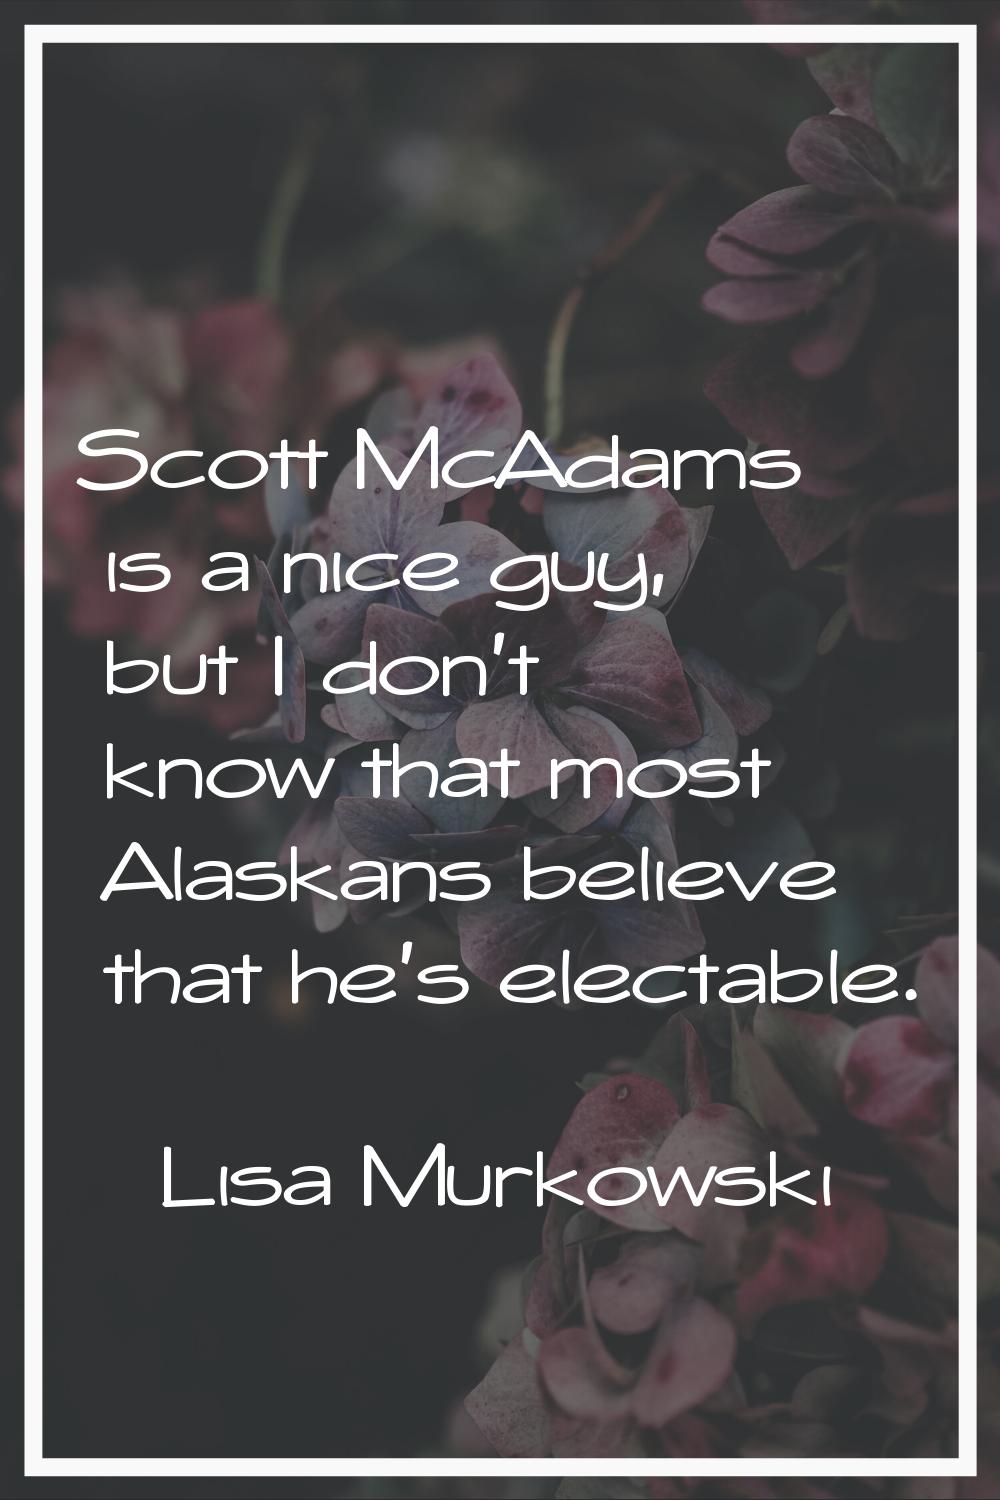 Scott McAdams is a nice guy, but I don't know that most Alaskans believe that he's electable.